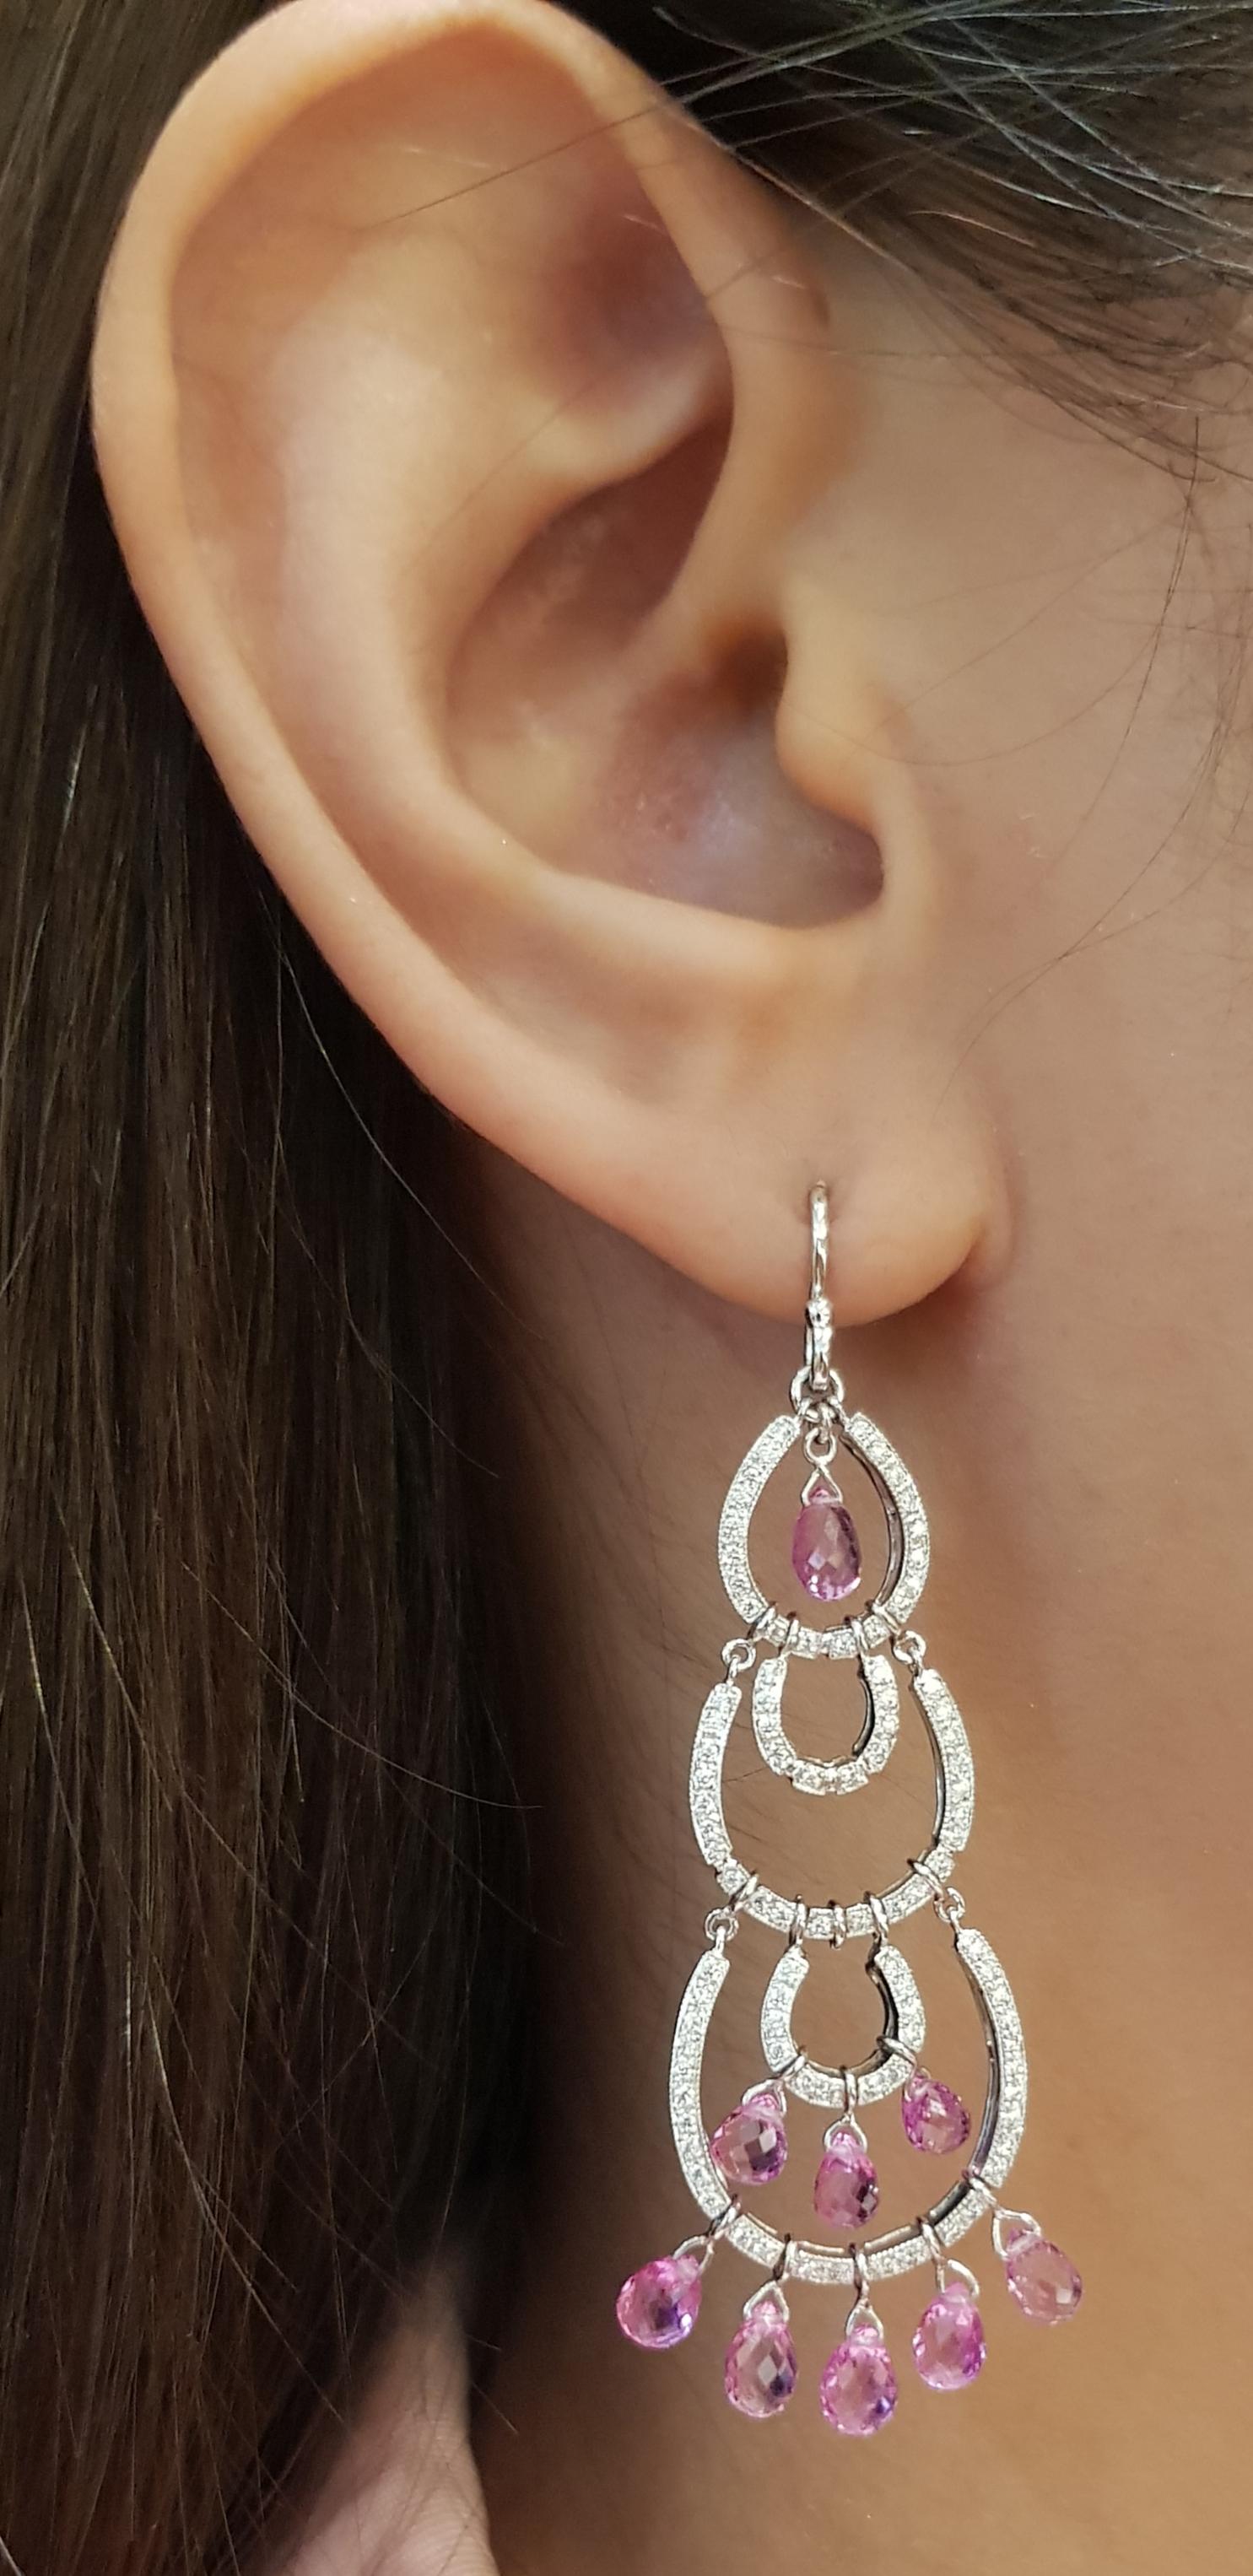 Pink Sapphire 7.50 carats with Diamond 0.45 carat Earrings set in 18 Karat White Gold Settings

Width:  1.6 cm 
Length:  5.4 cm
Total Weight: 8.04 grams

